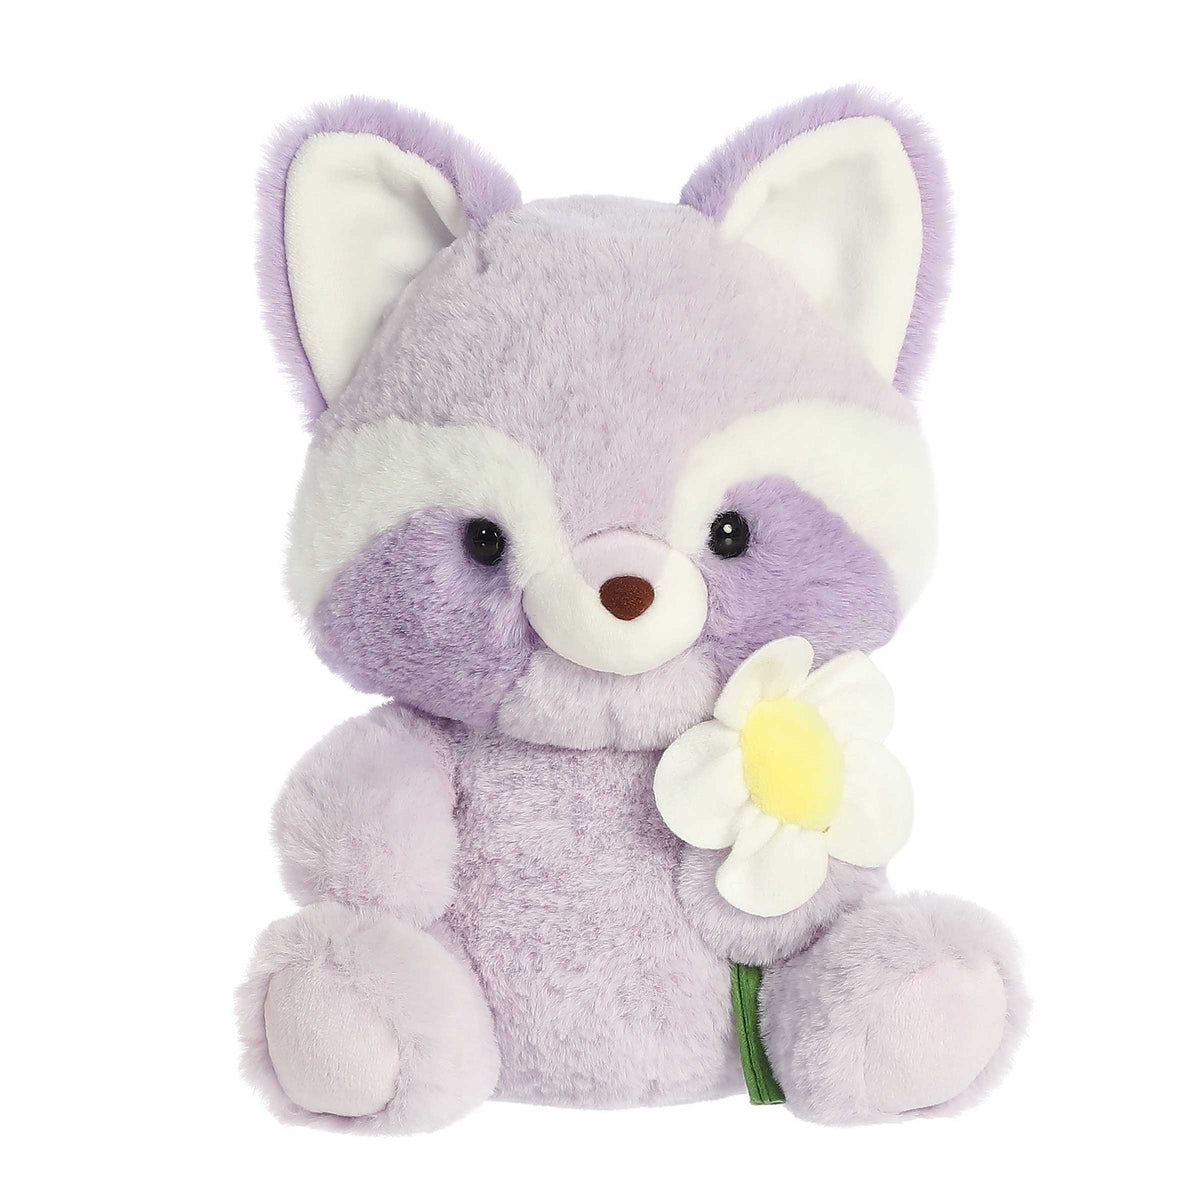 Raccoon plush from Aurora's Spring Collection, with soft lavender fur, a white belly, and holding a cheerful daisy